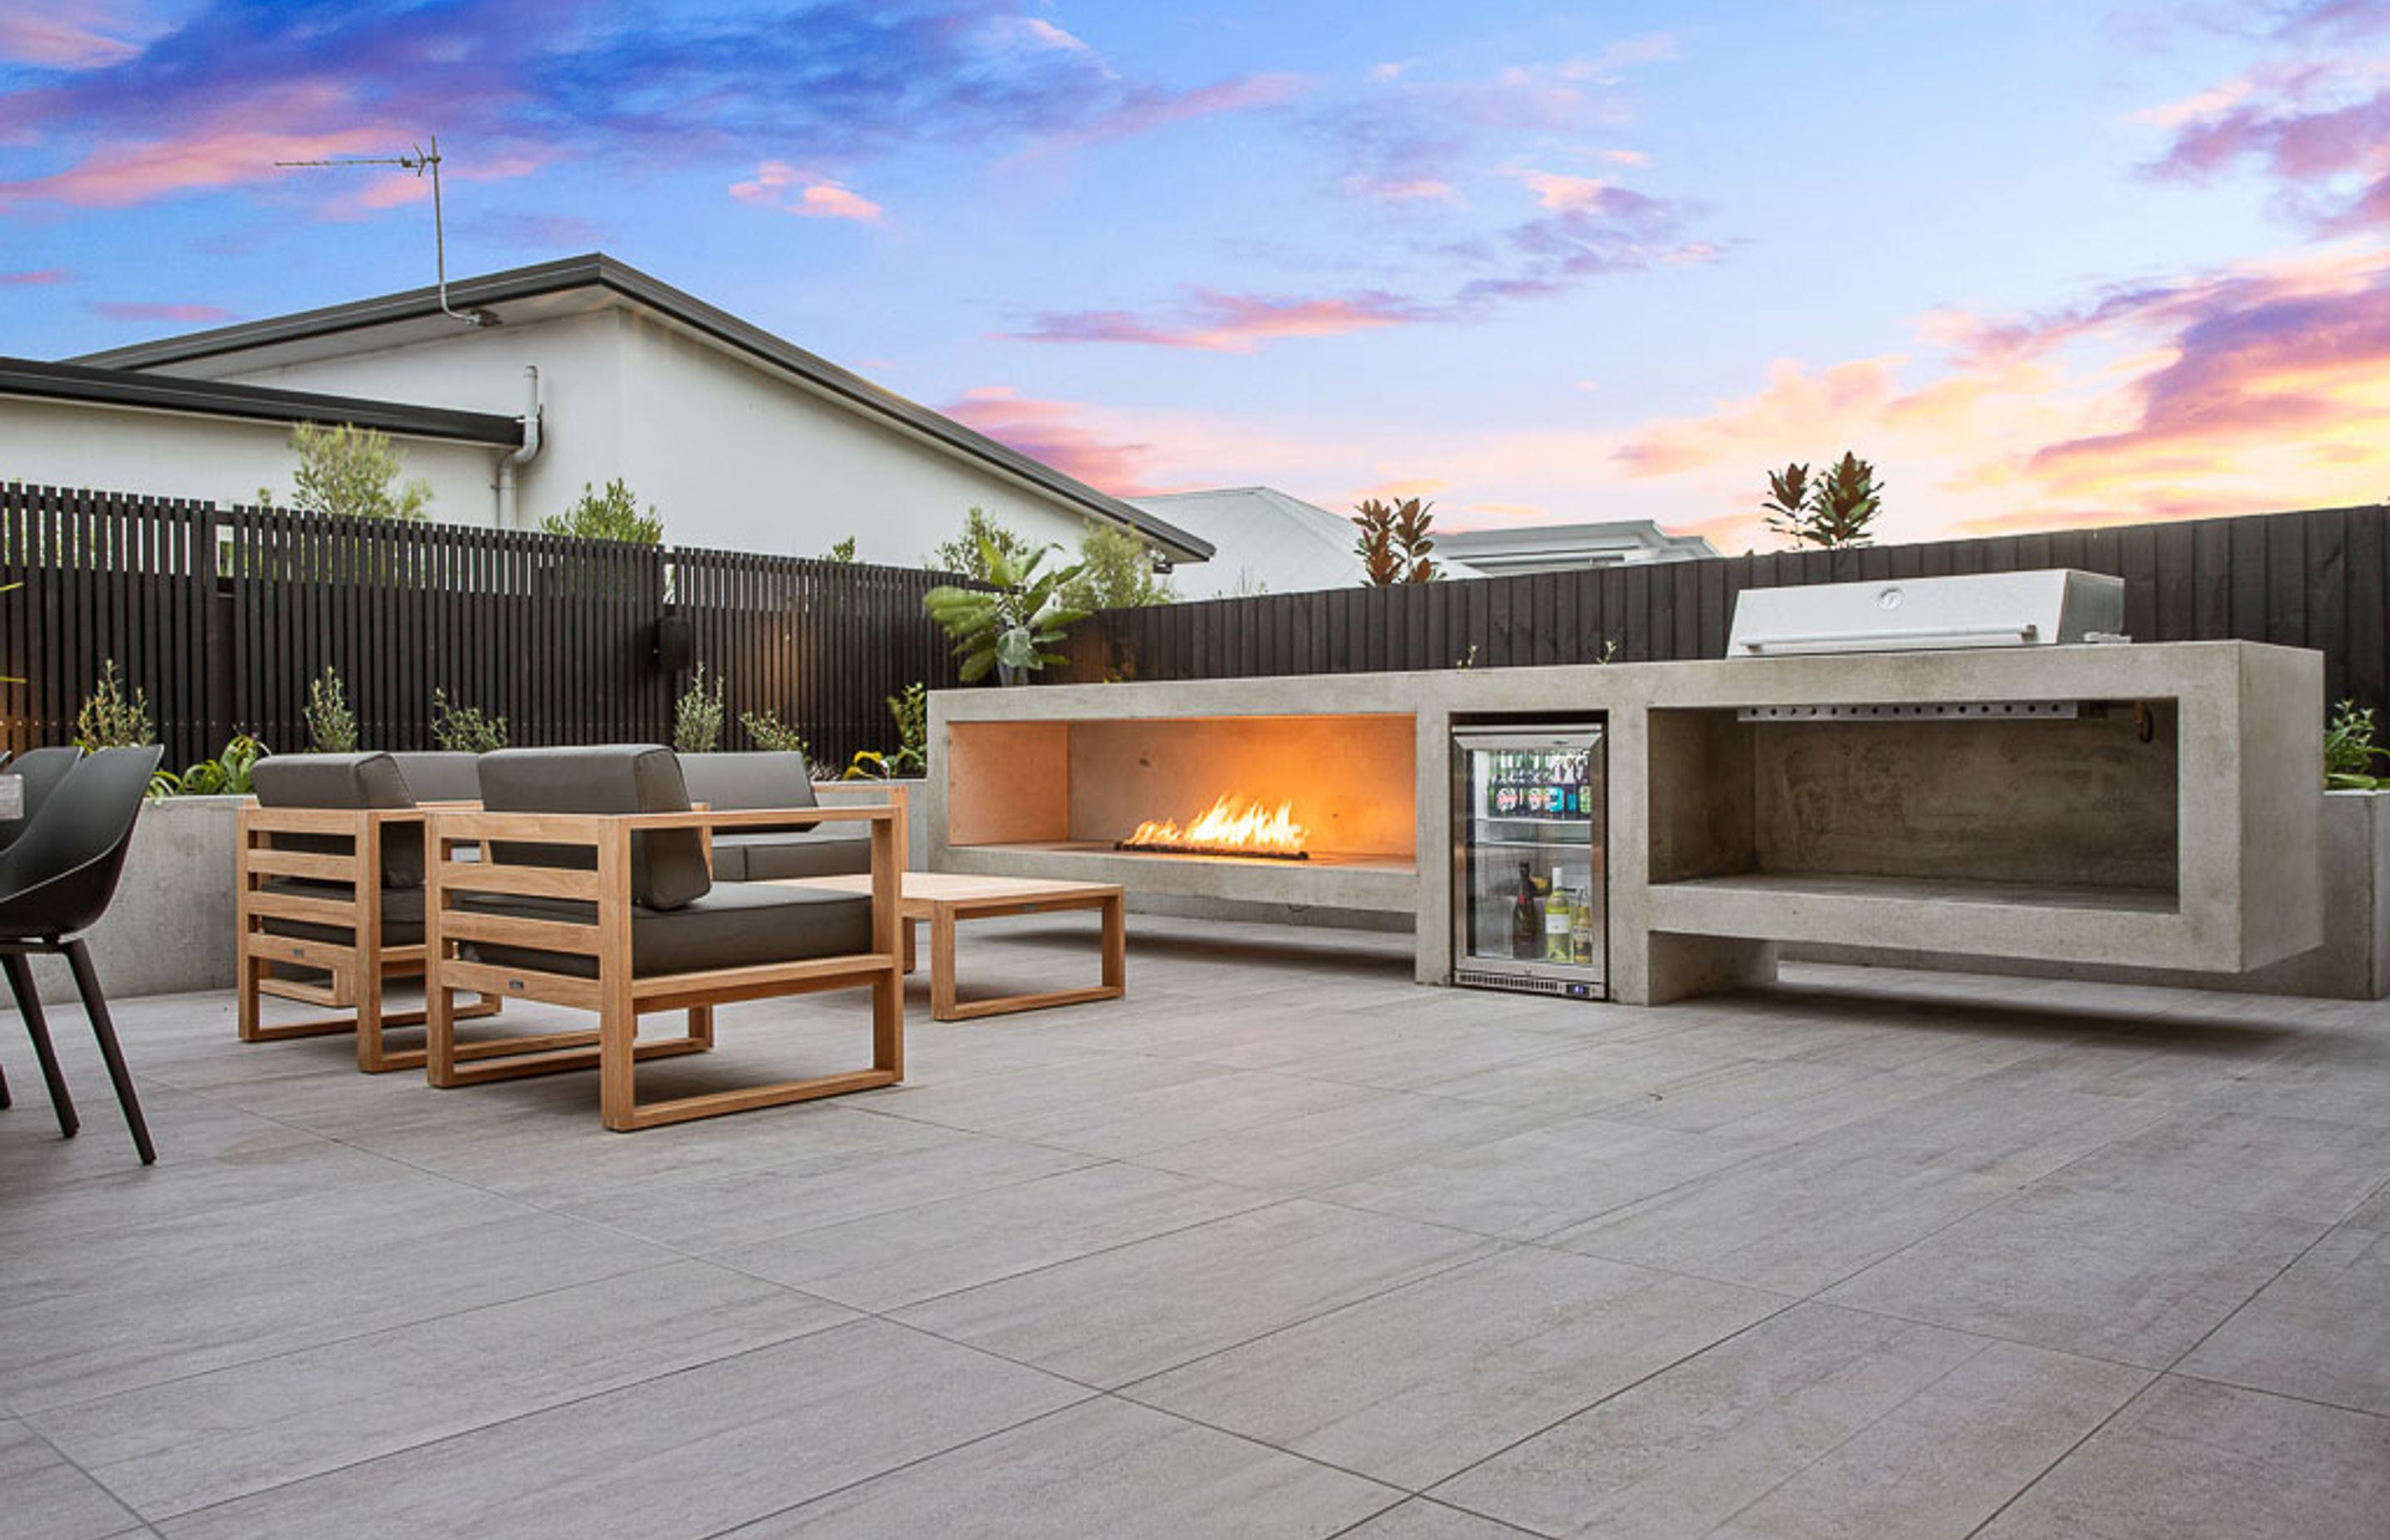 The backyard barbeque space with built-in fridge and gas fire.